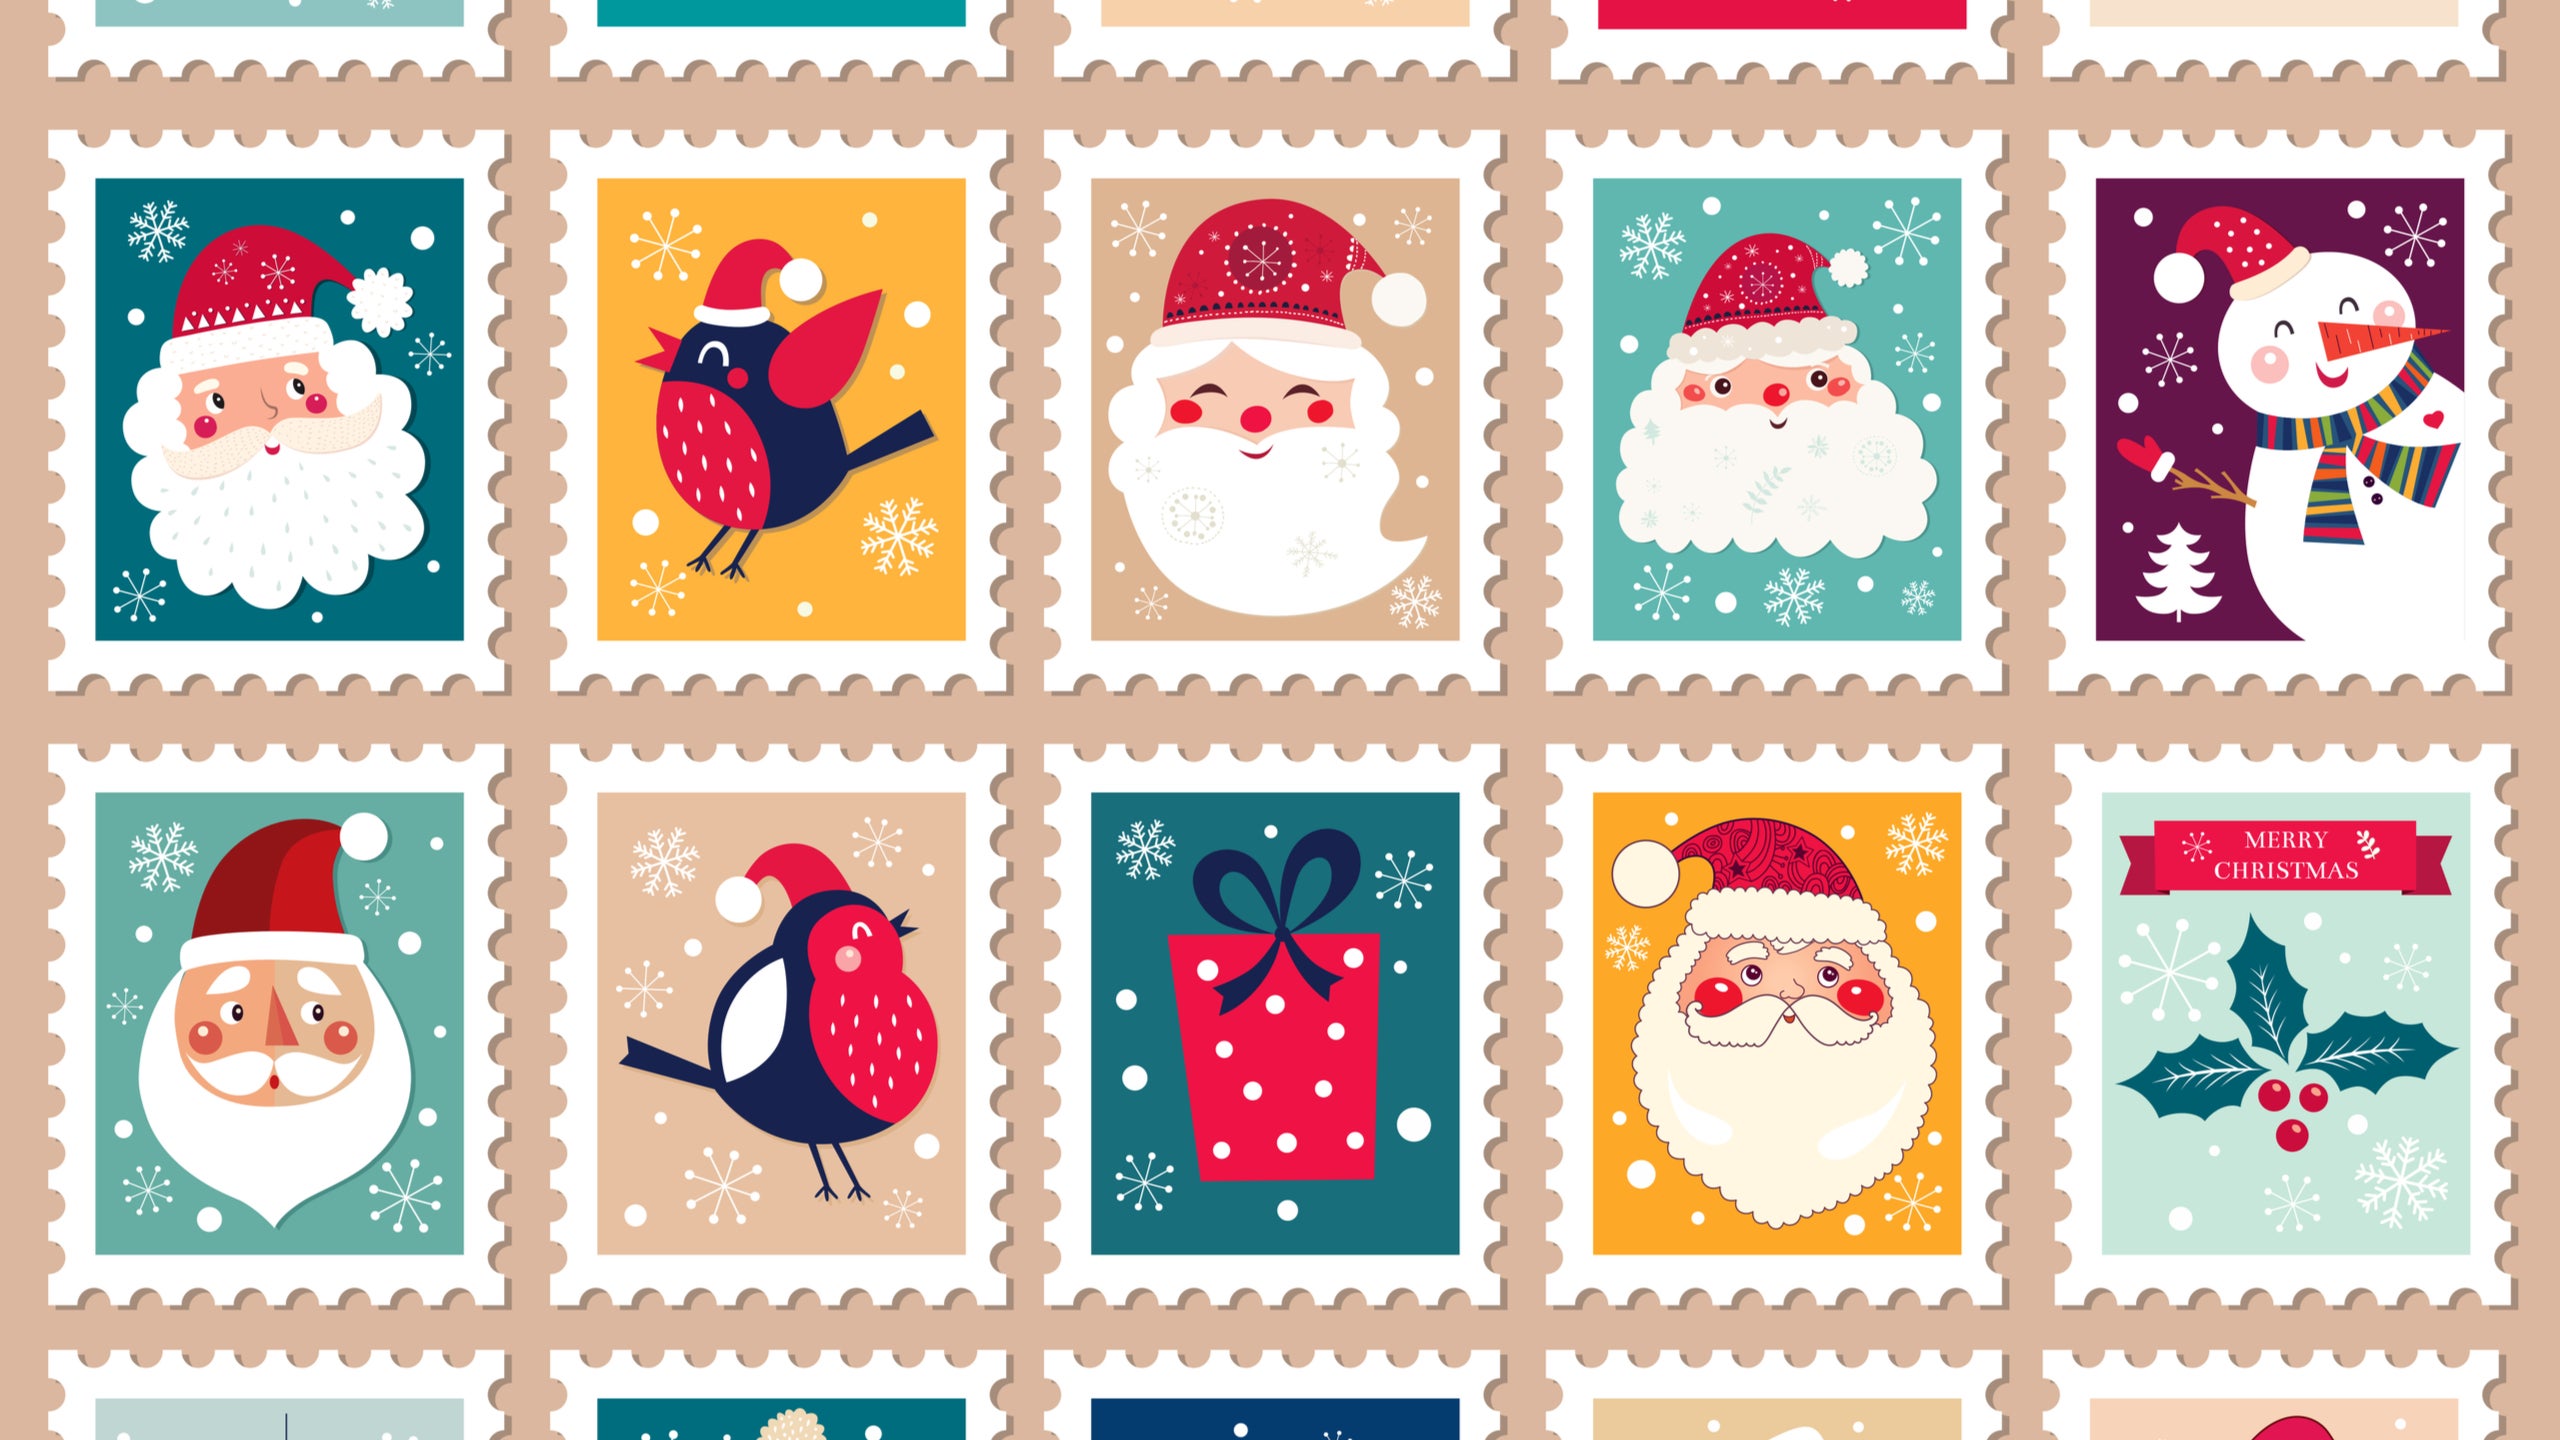 Actually, Stamps Are a Great Stocking Stuffer (I’m Right About This)